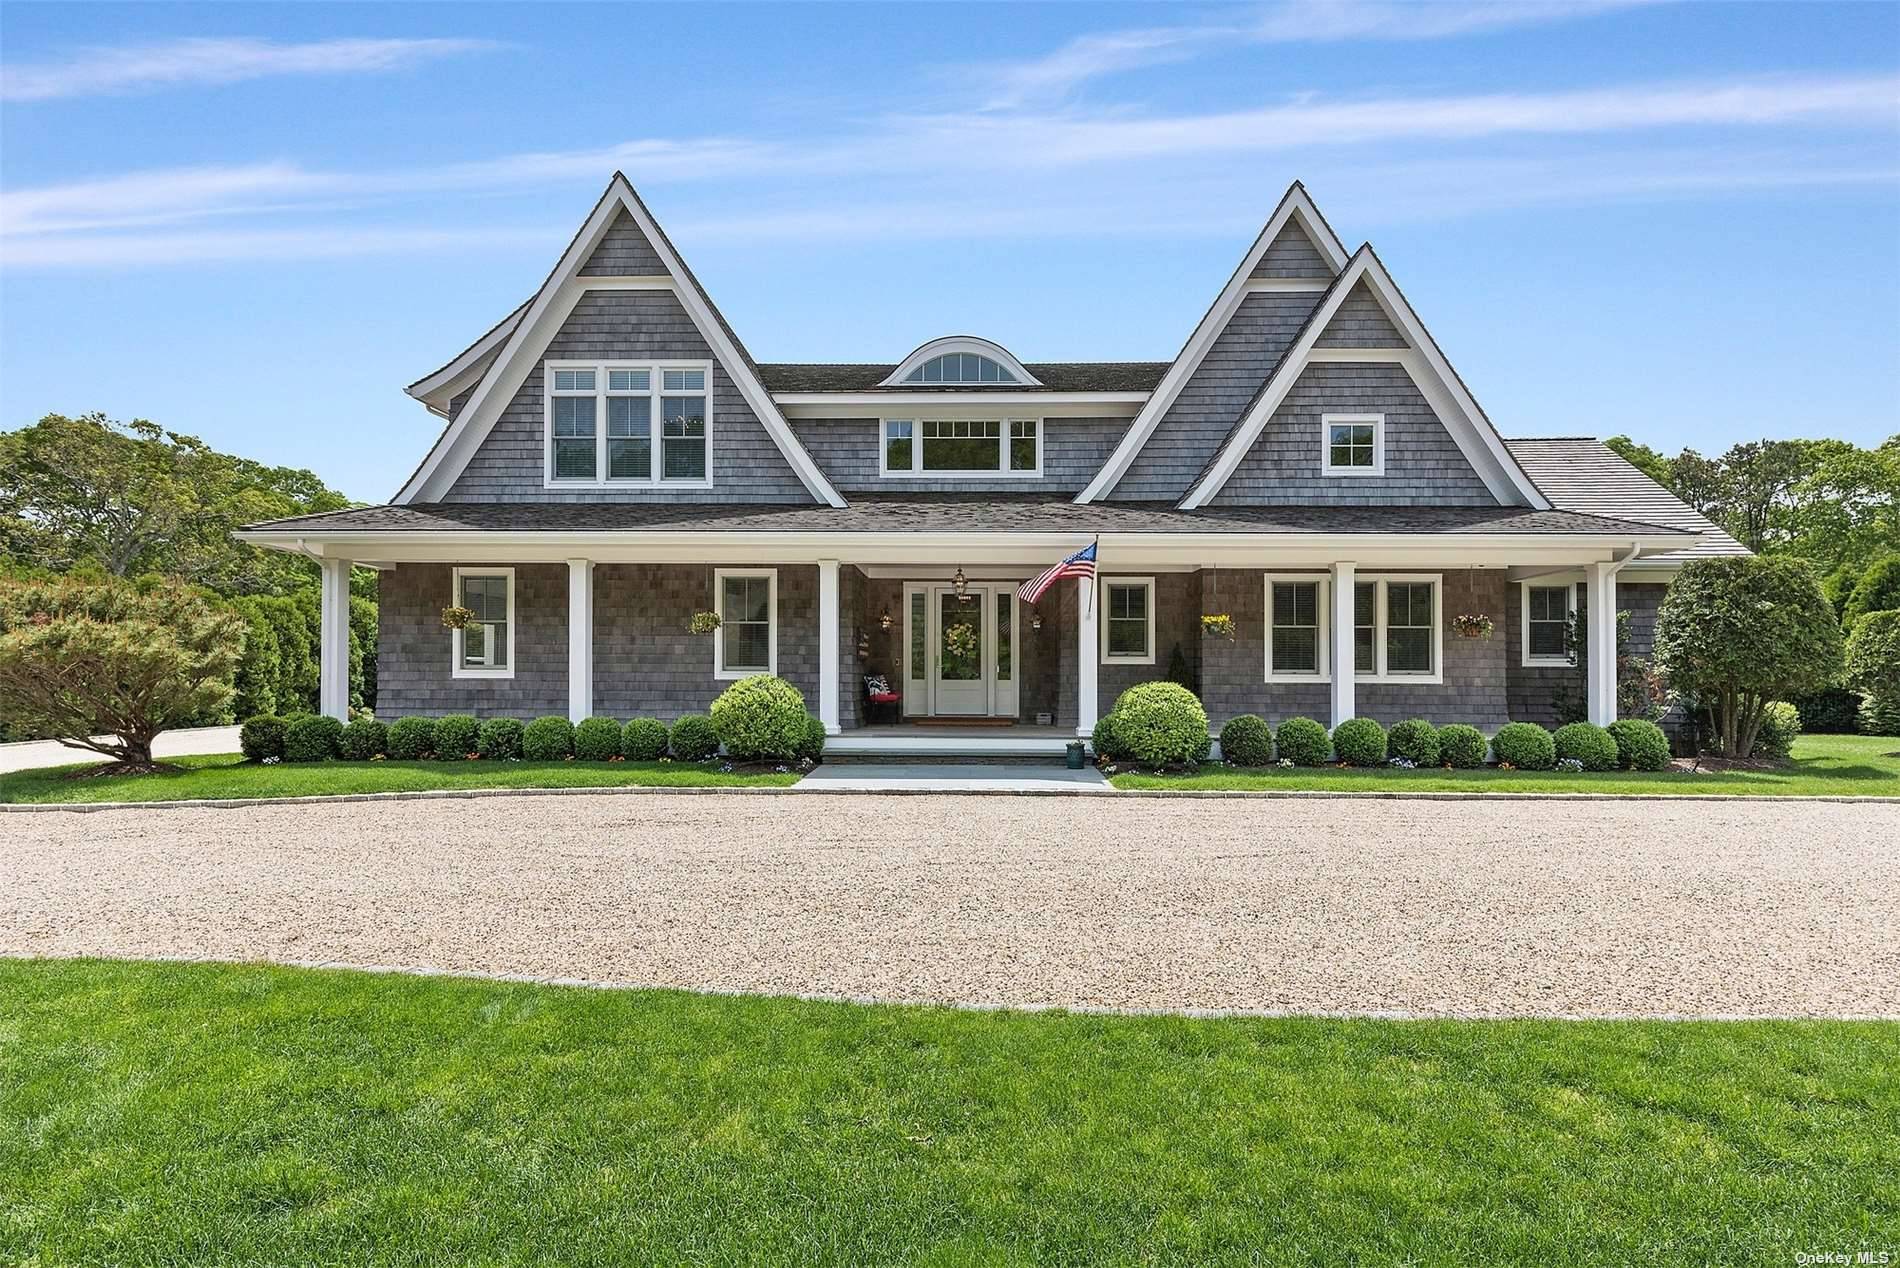 This newly constructed Quogue home, set on 1.